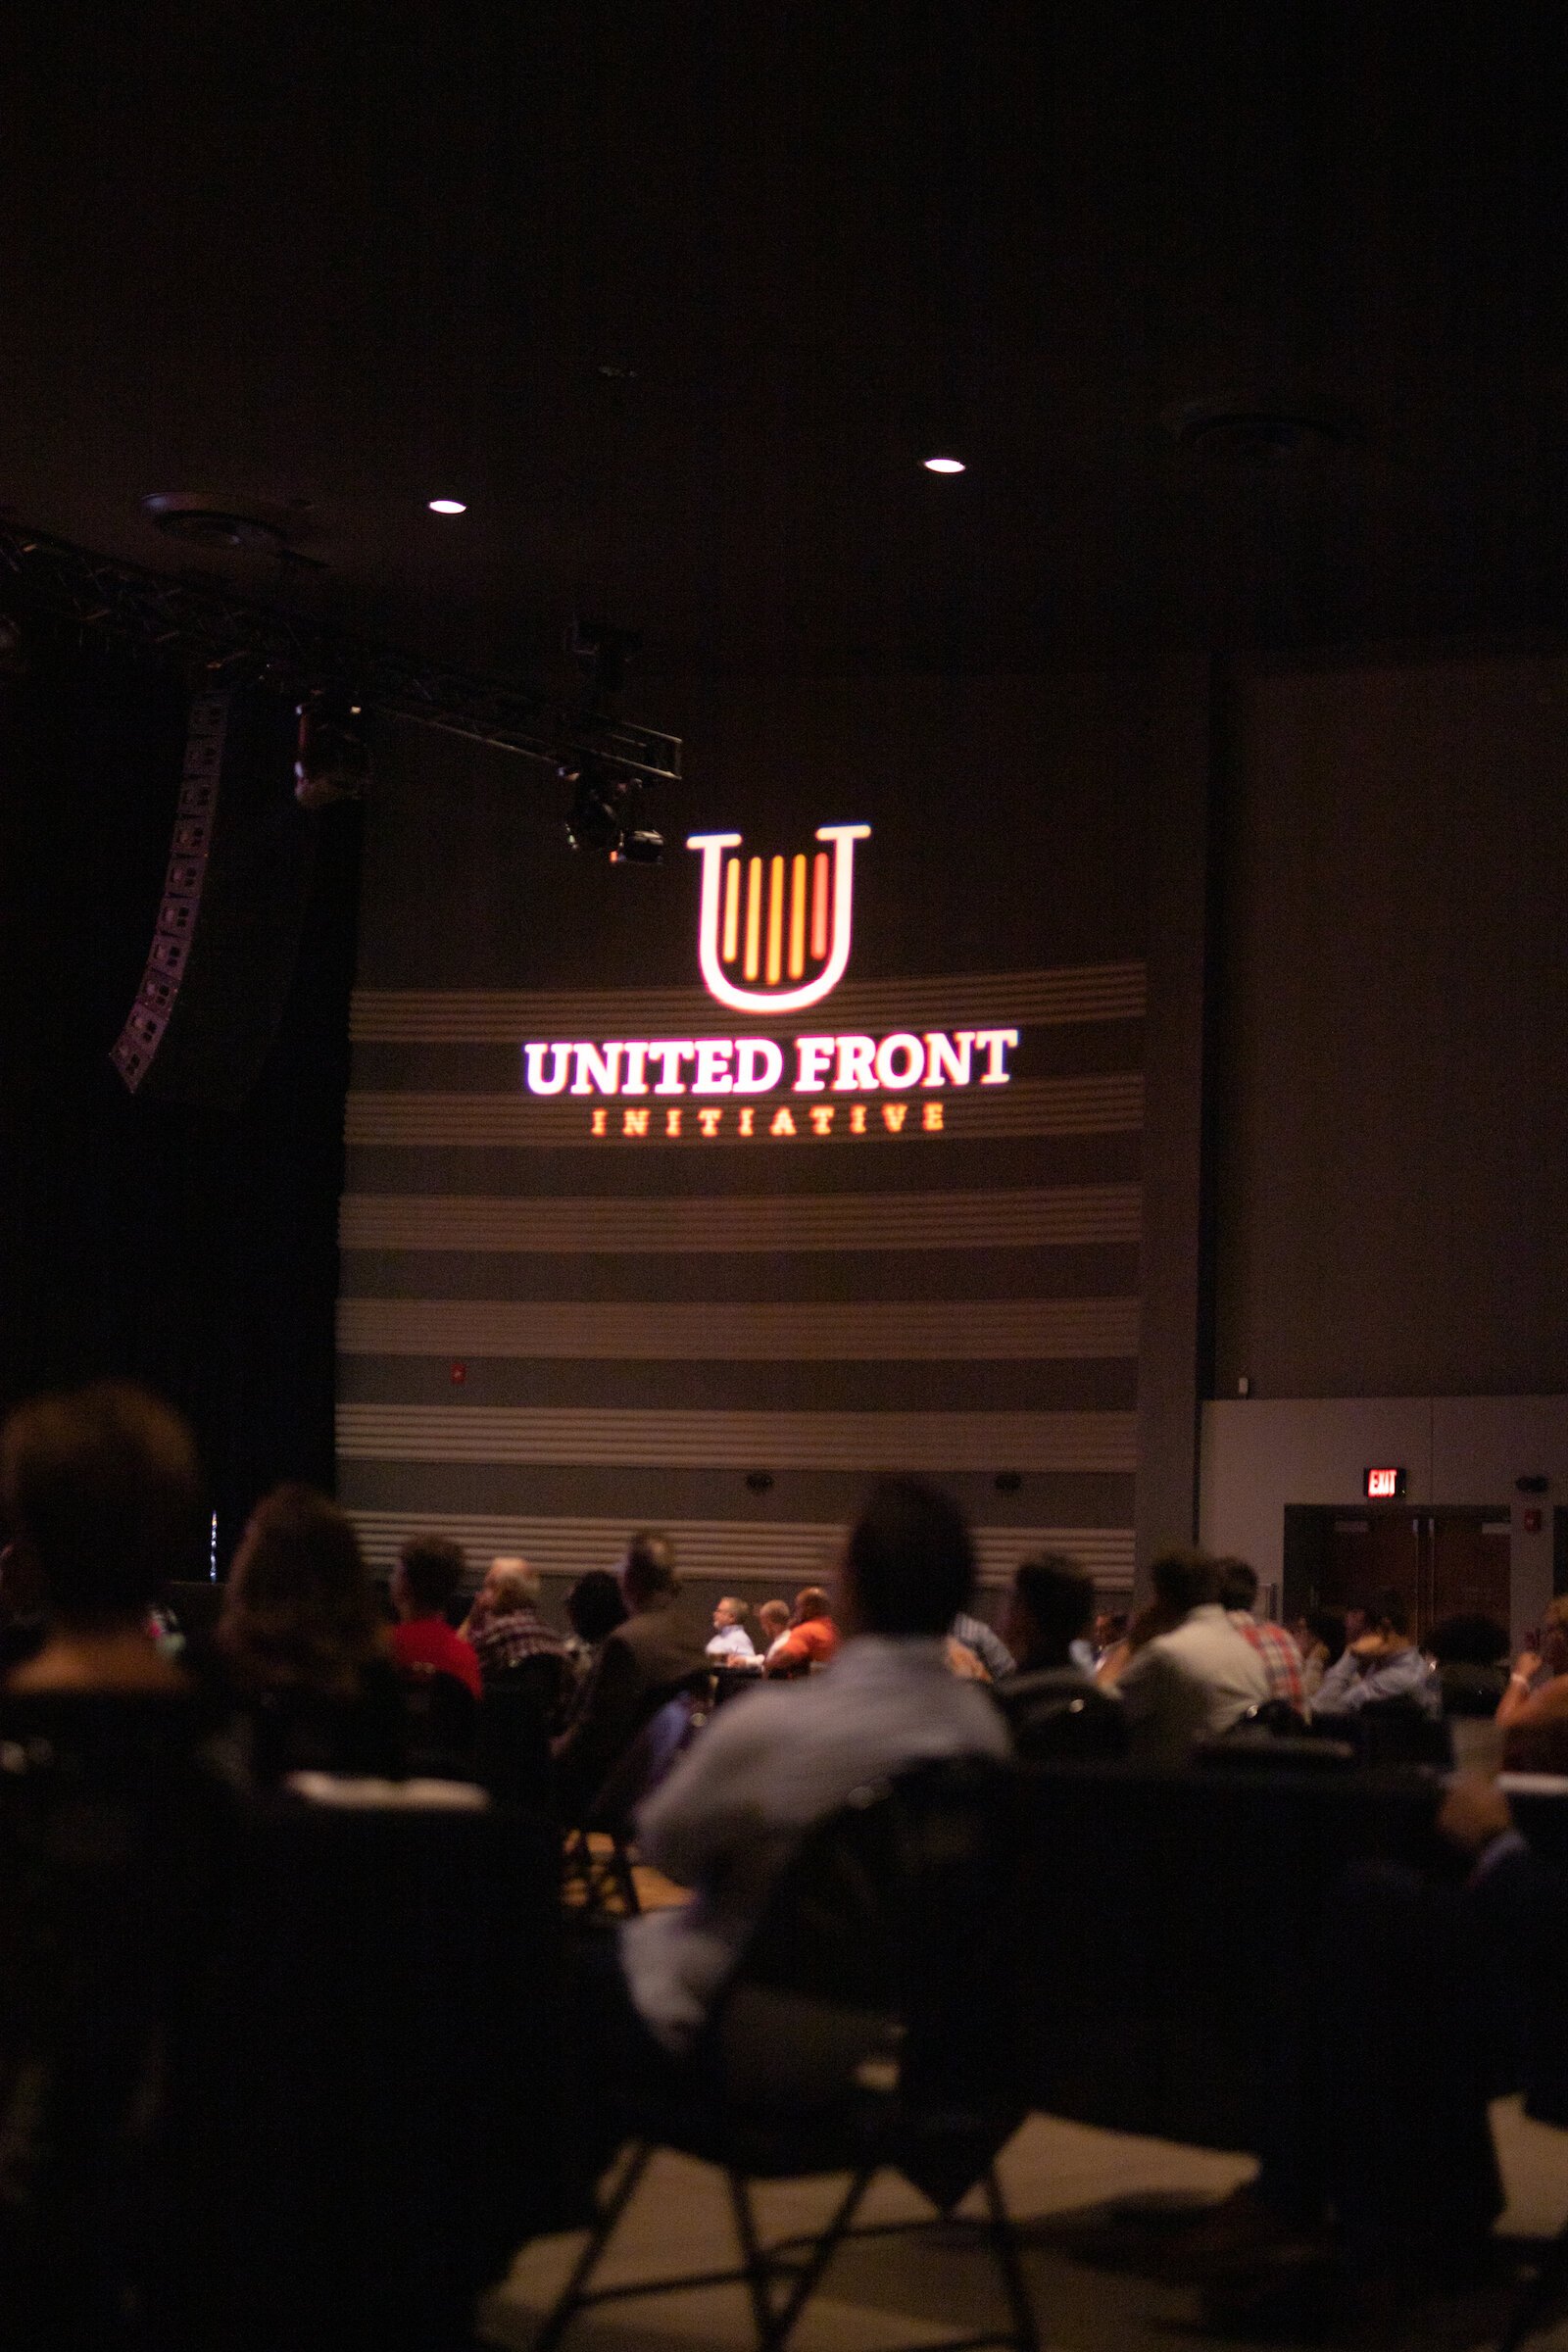 A United Front keynote session in July at the Clyde Theatre at 1808 Bluffton Rd.